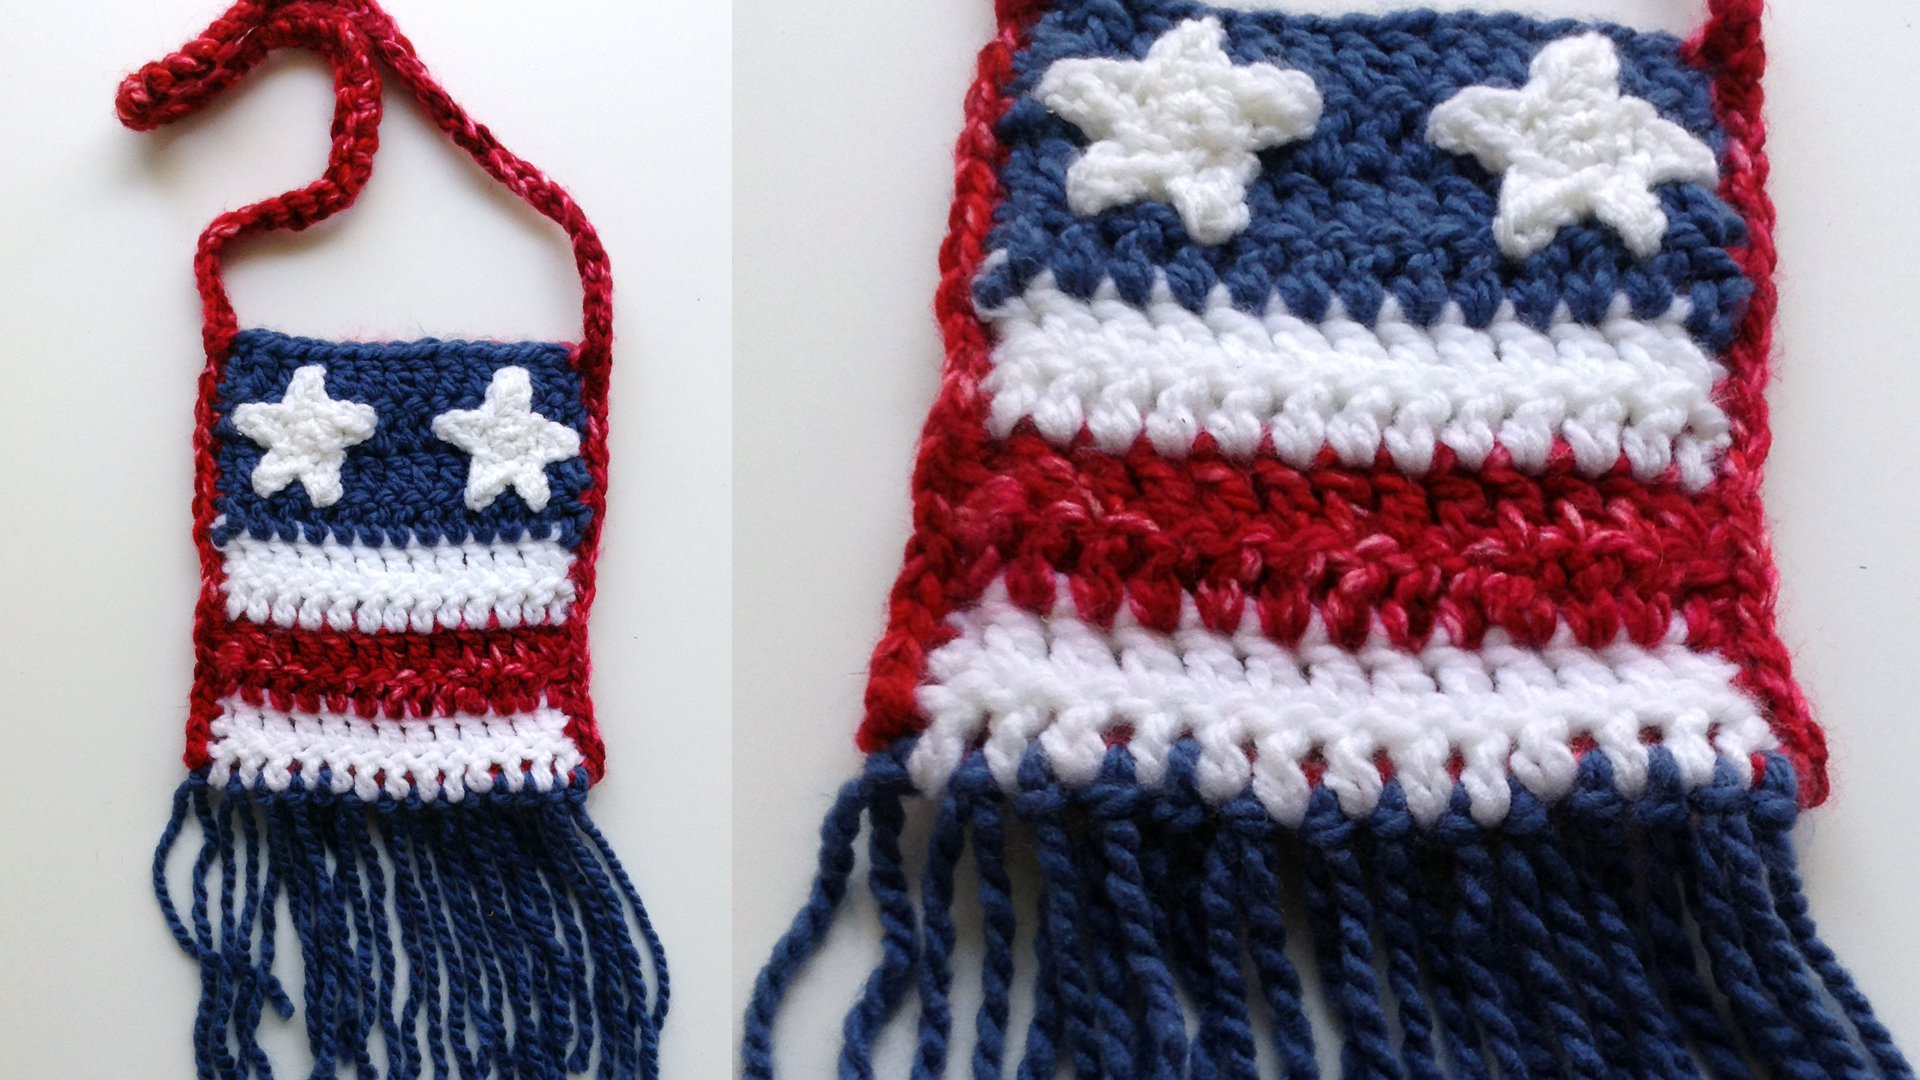 maggies-crochet-4th-of-july-childs-purse-free-pattern-close-up